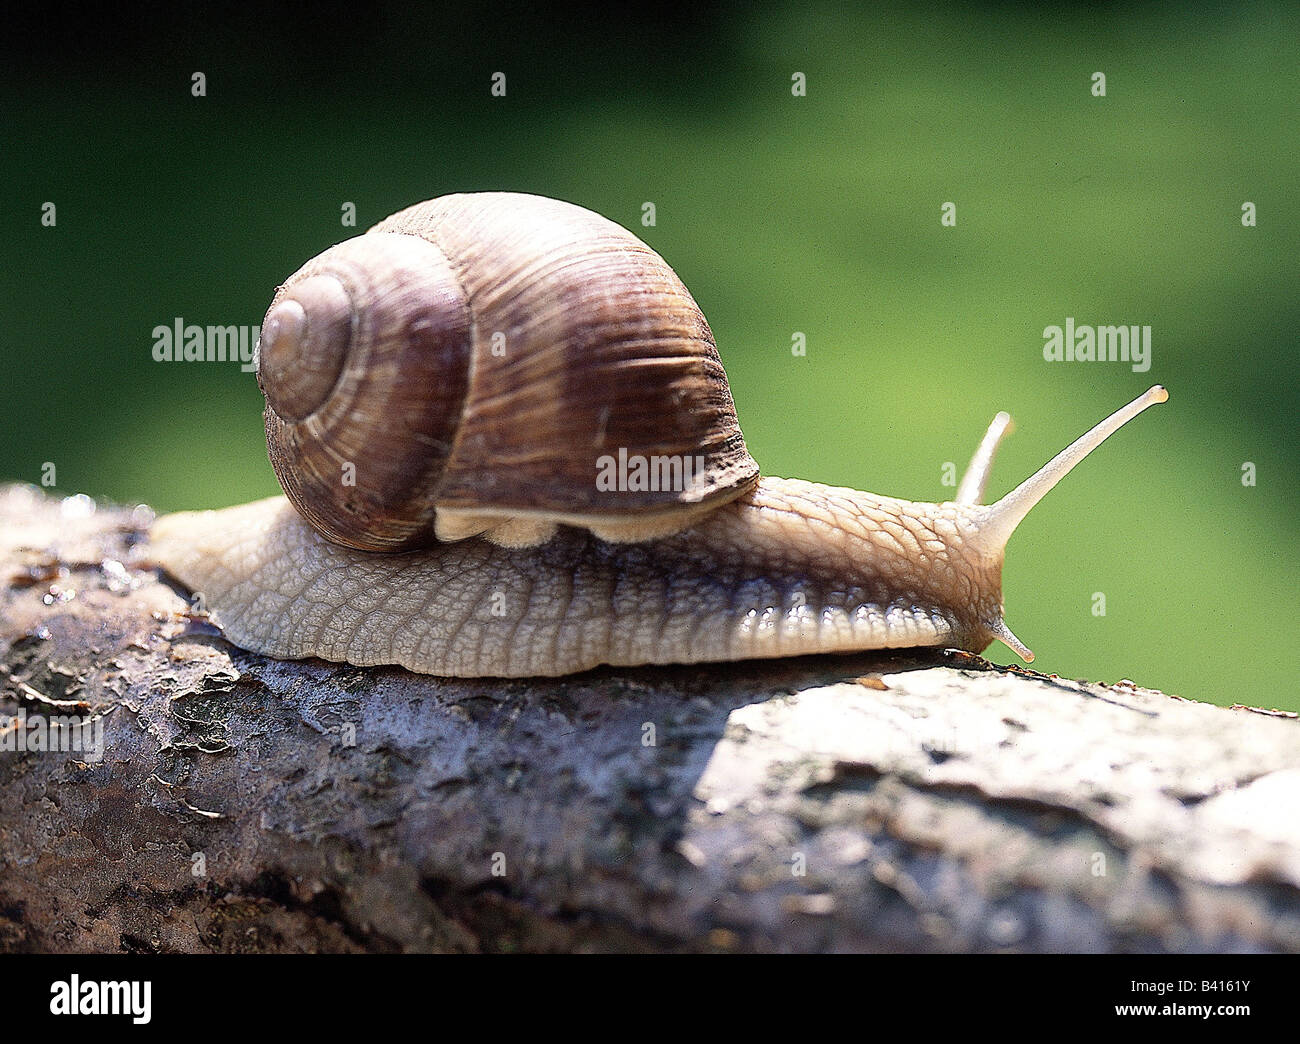 zoology / animals, mollusc, Helicidae, grapevine snail (Helix pomatia), on branch, distribution: Europe, molluscs, large garden Stock Photo